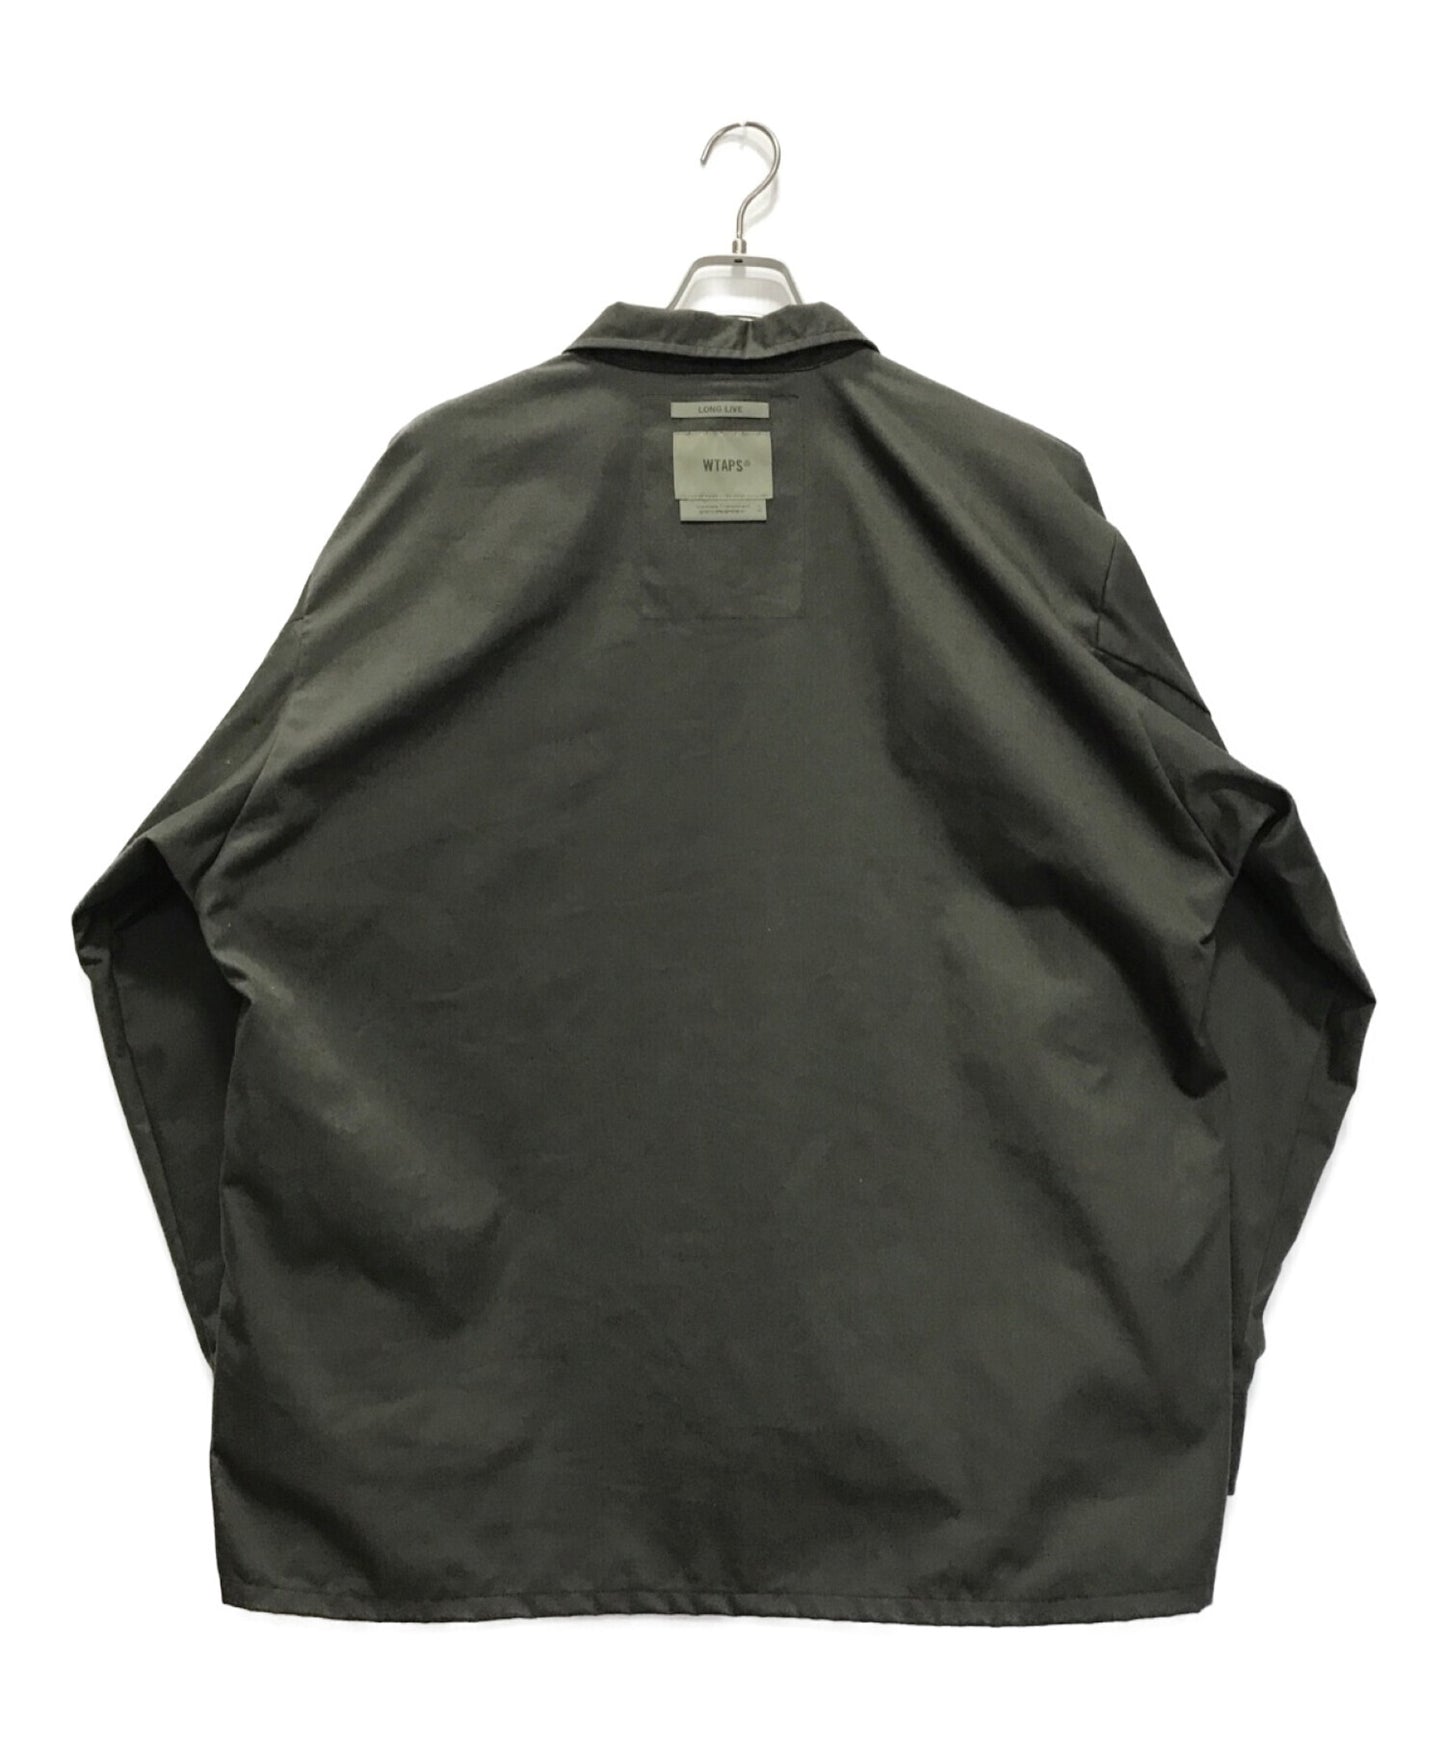 [Pre-owned] WTAPS Jungle LS Shirt Olive Drab 222wvdt-shm03